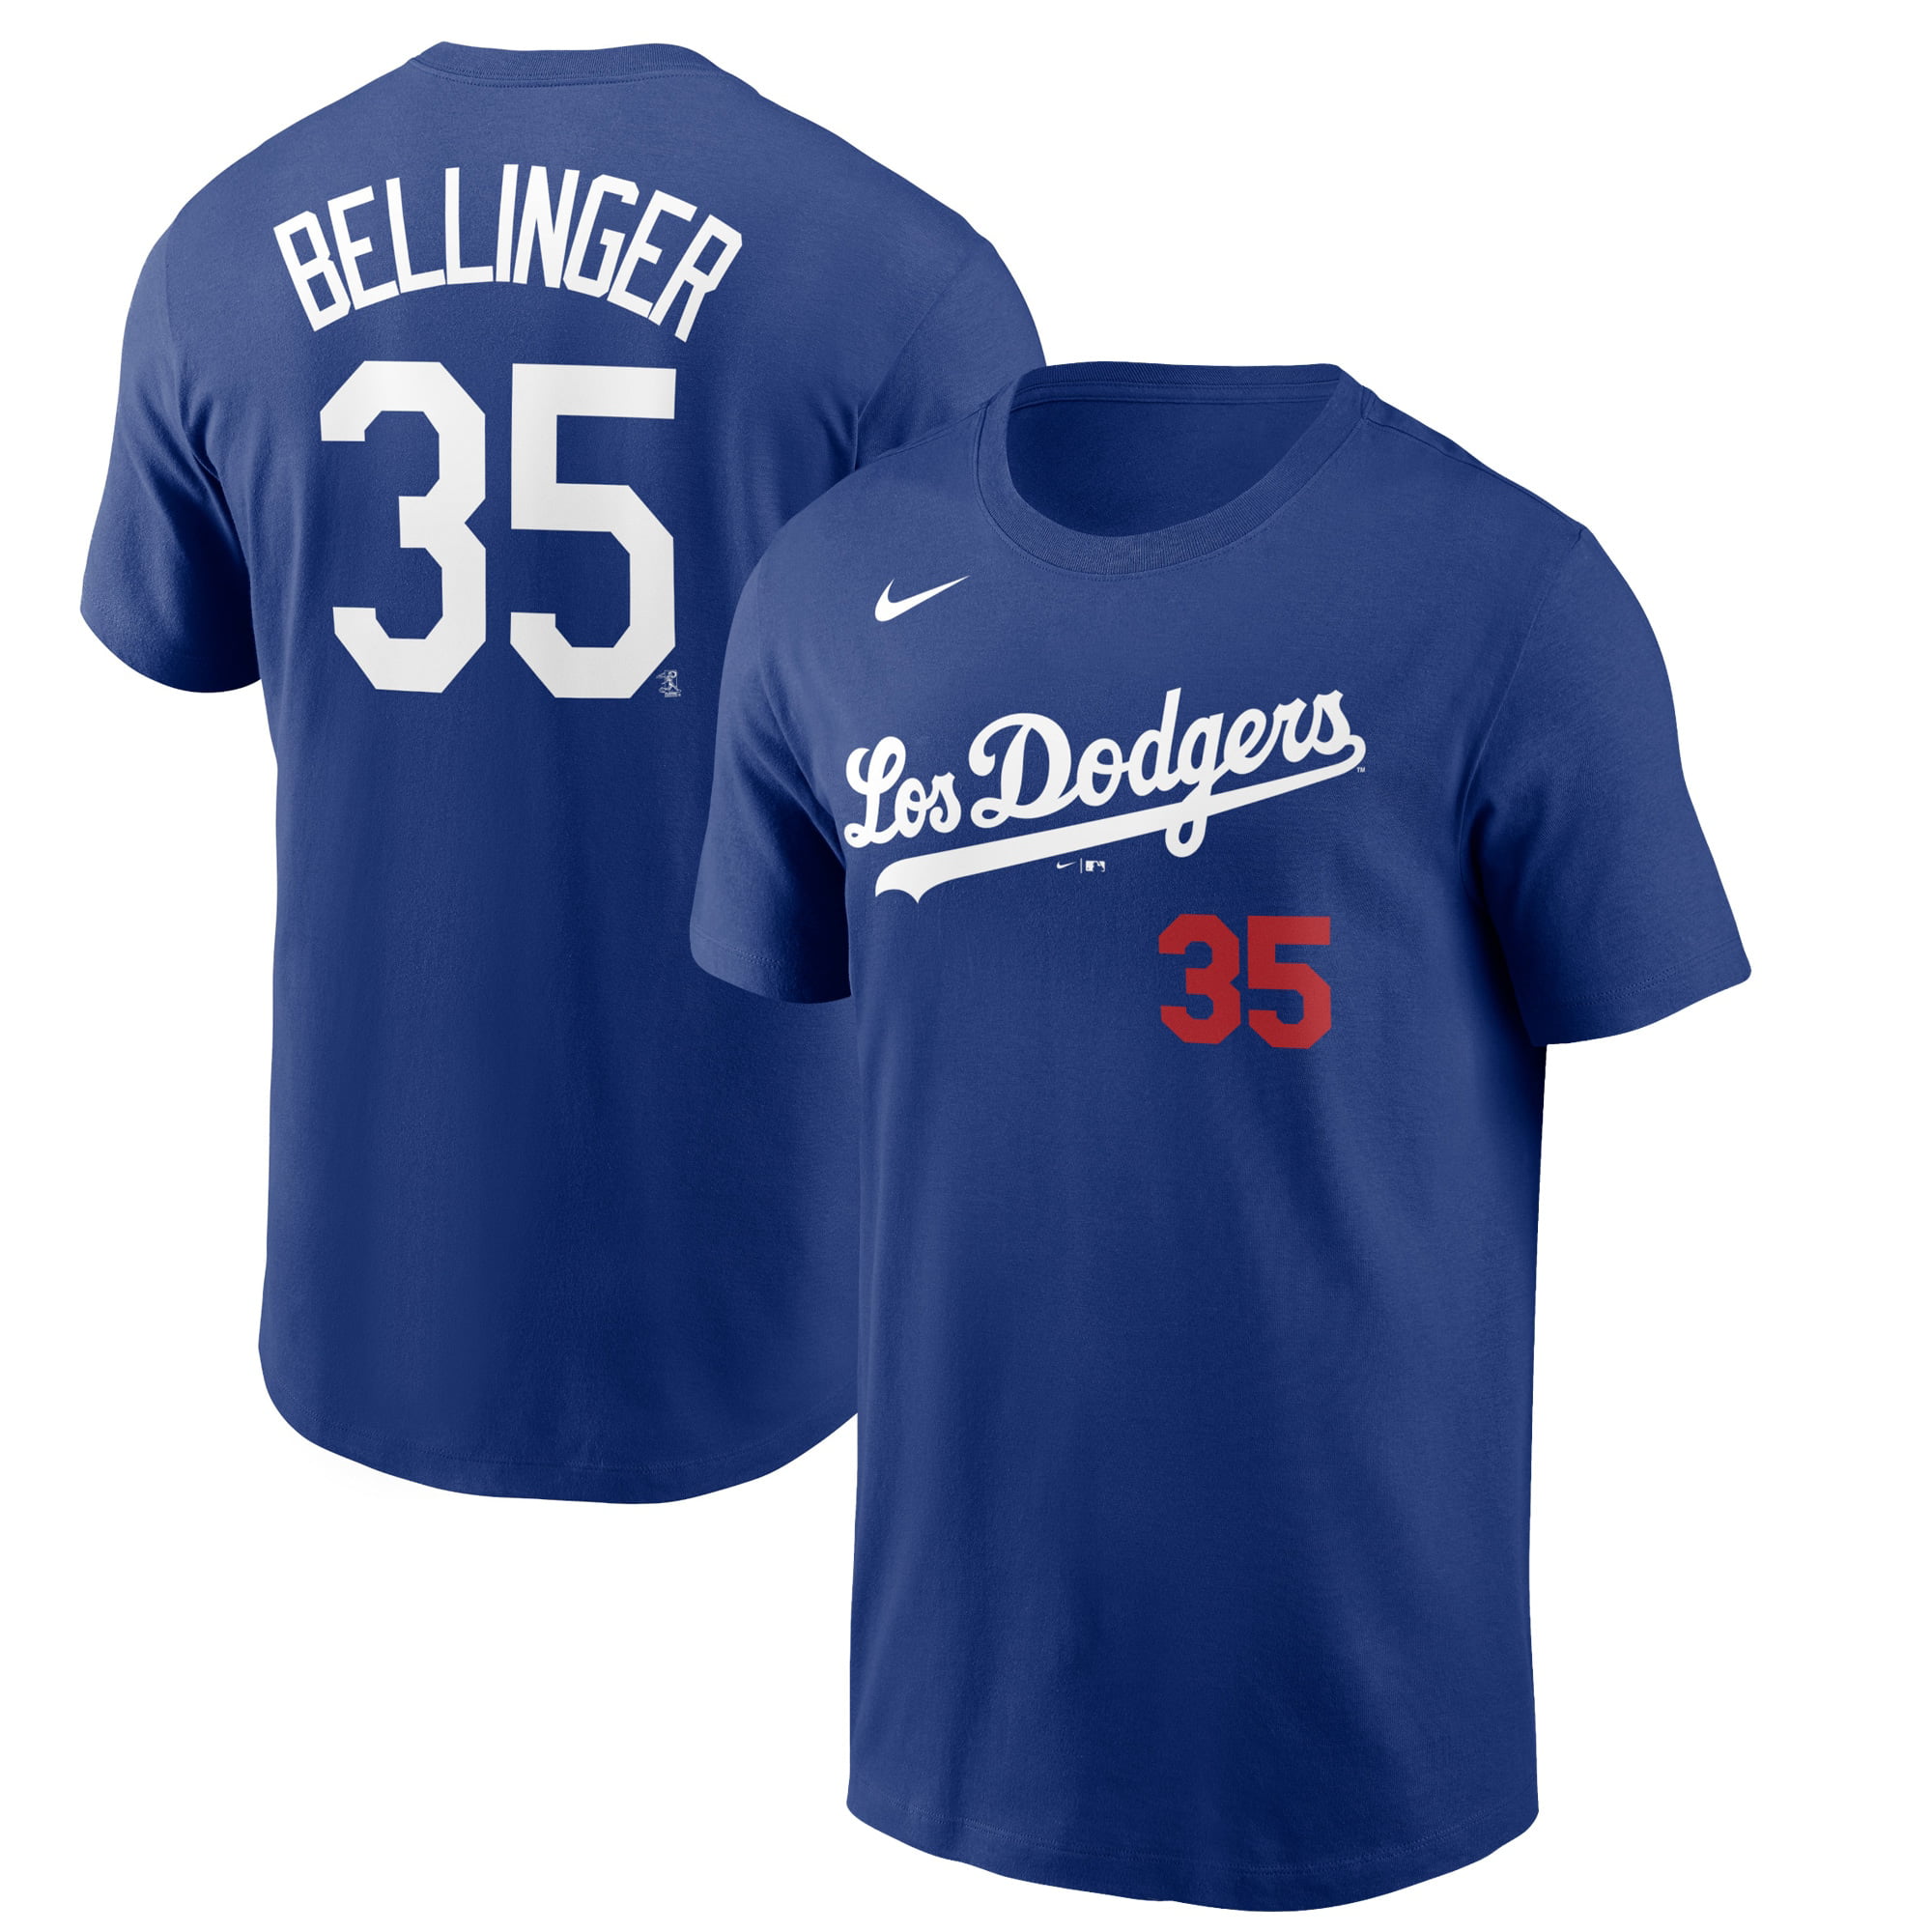 cody bellinger city connect jersey